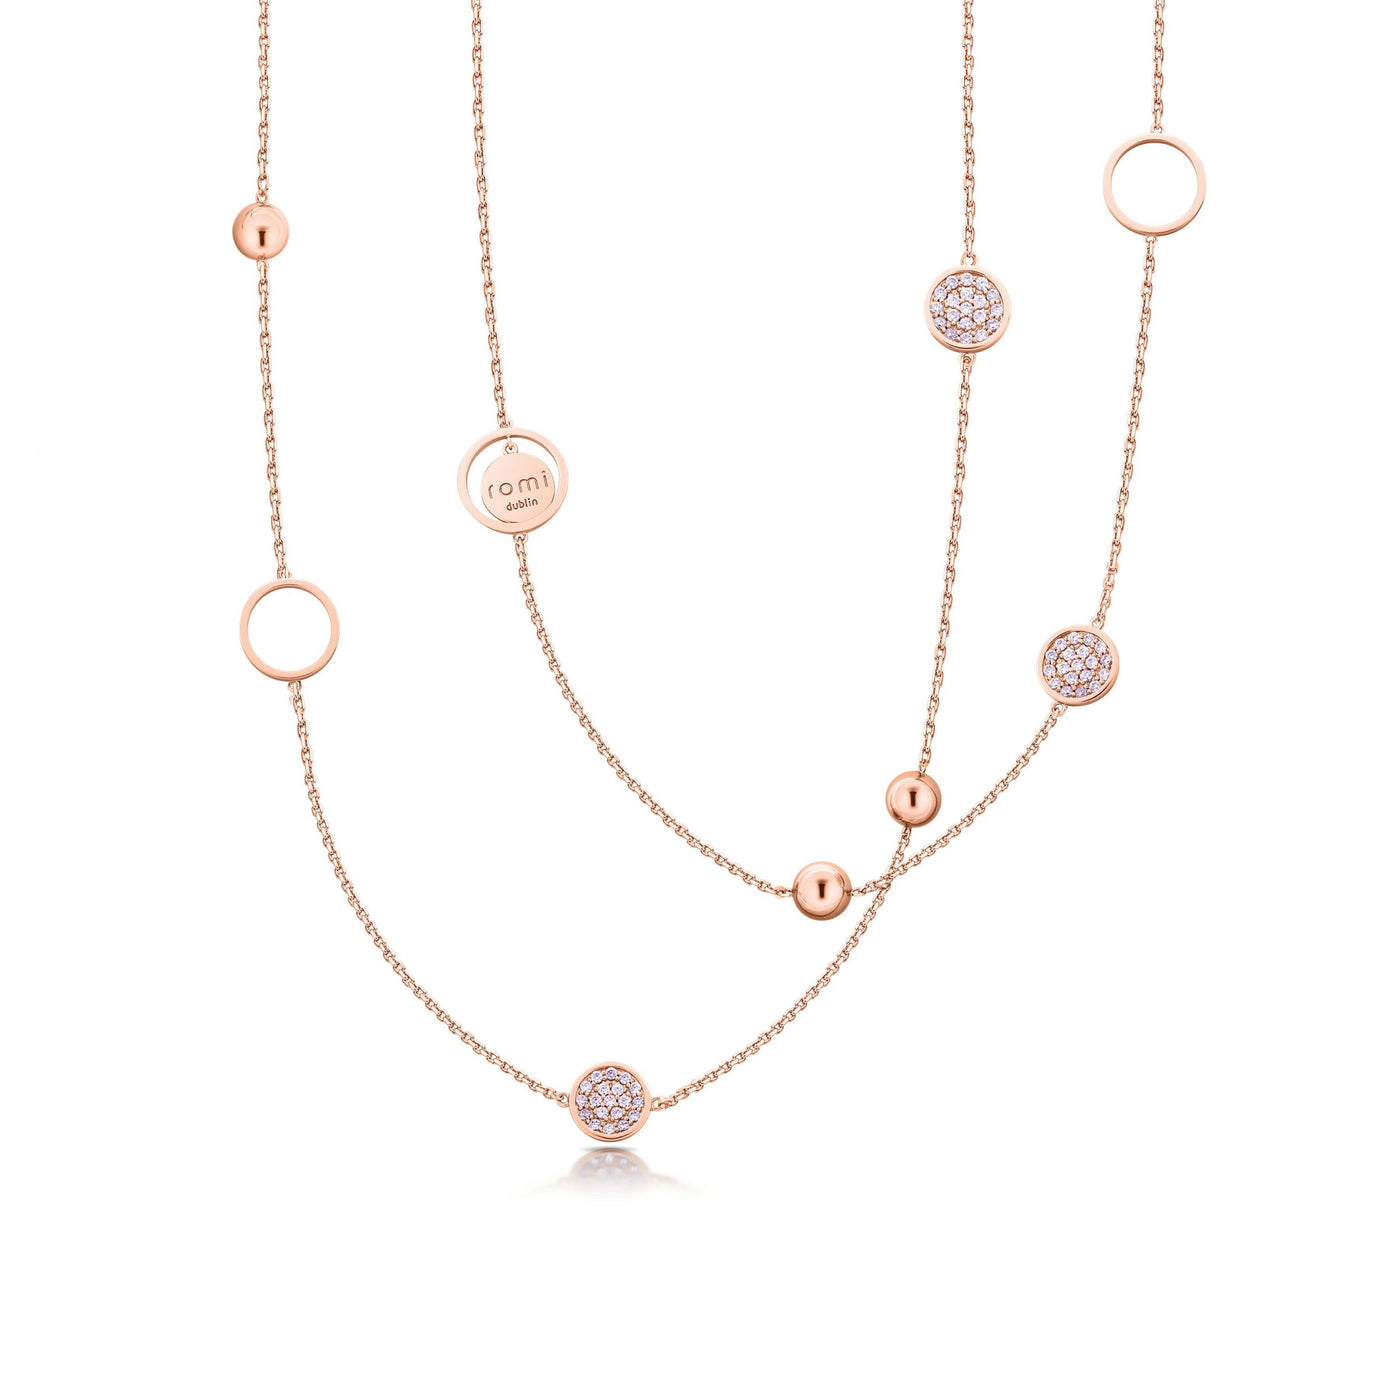 Romi Necklace - Pave & Bead Double Length - Rose Gold Plated